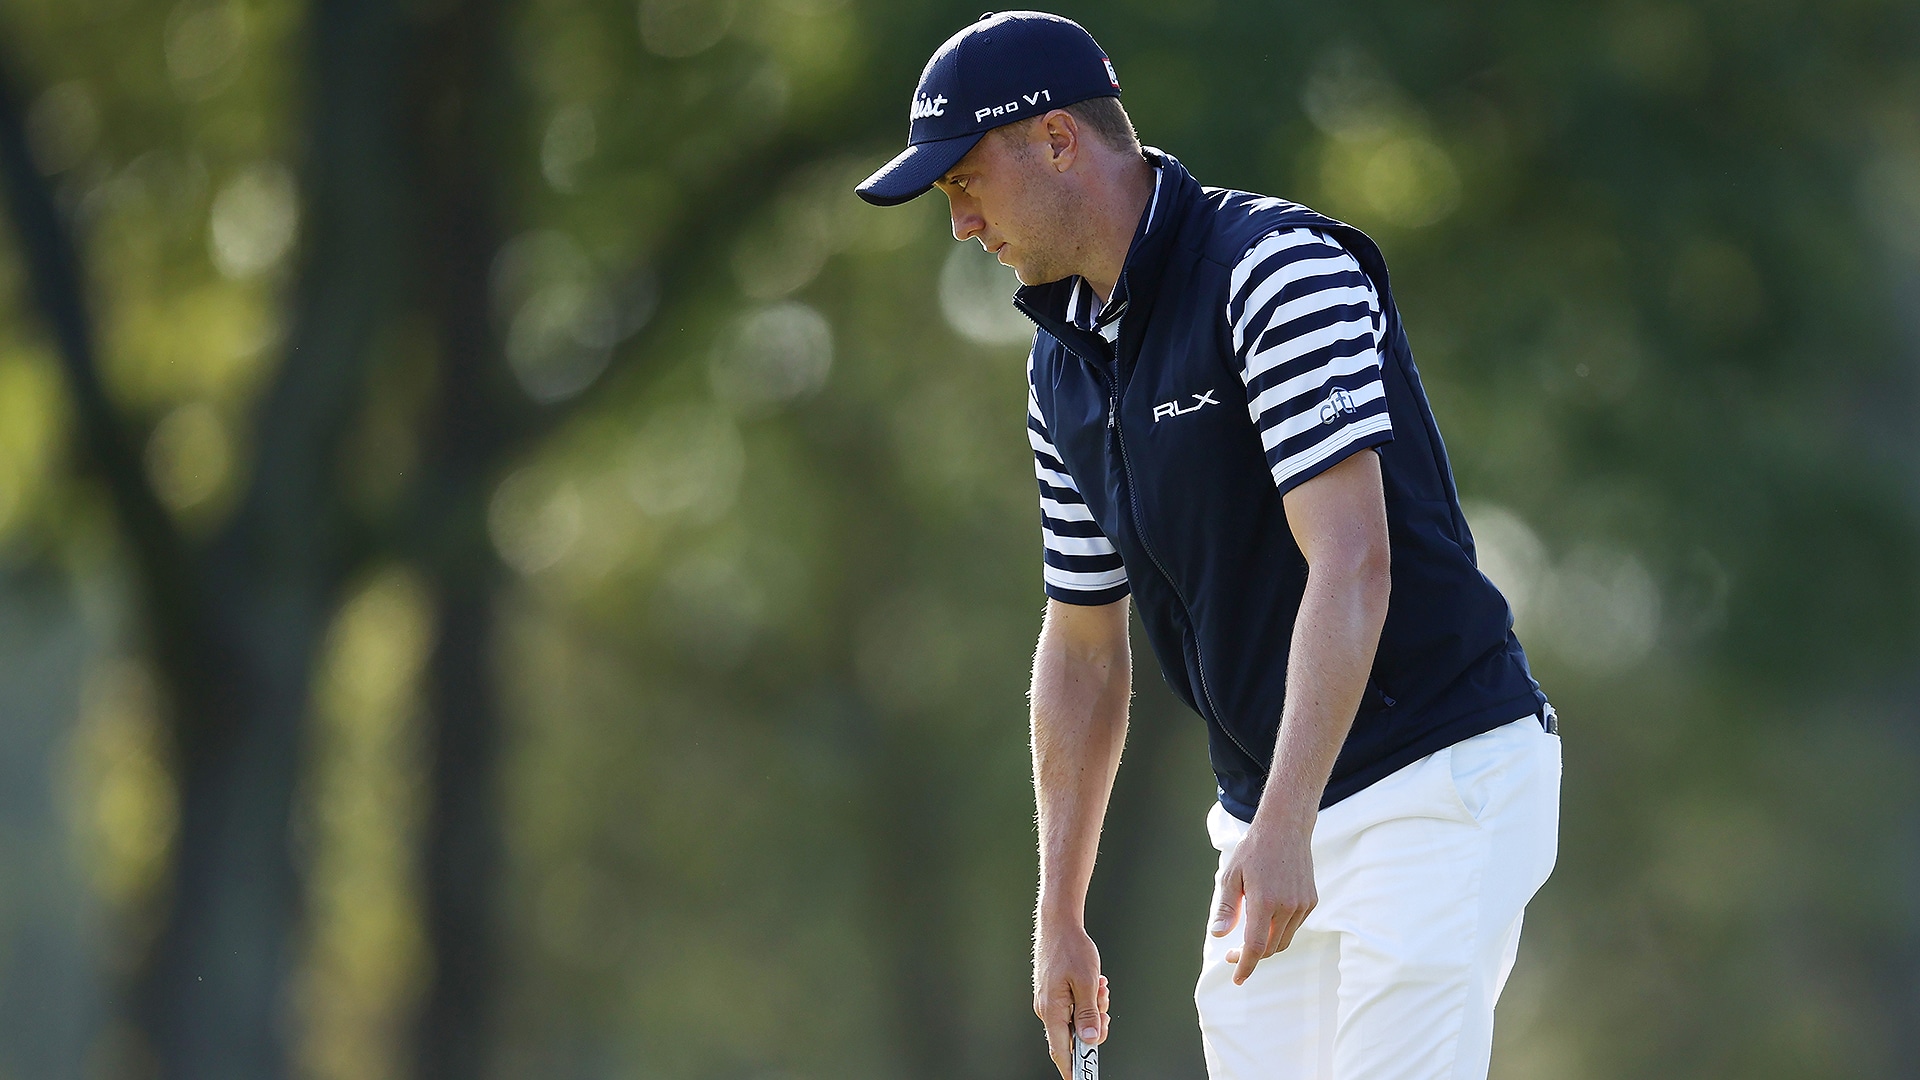 Justin Thomas fights through bad stretch on Friday to stay in contention at U.S. Open 2